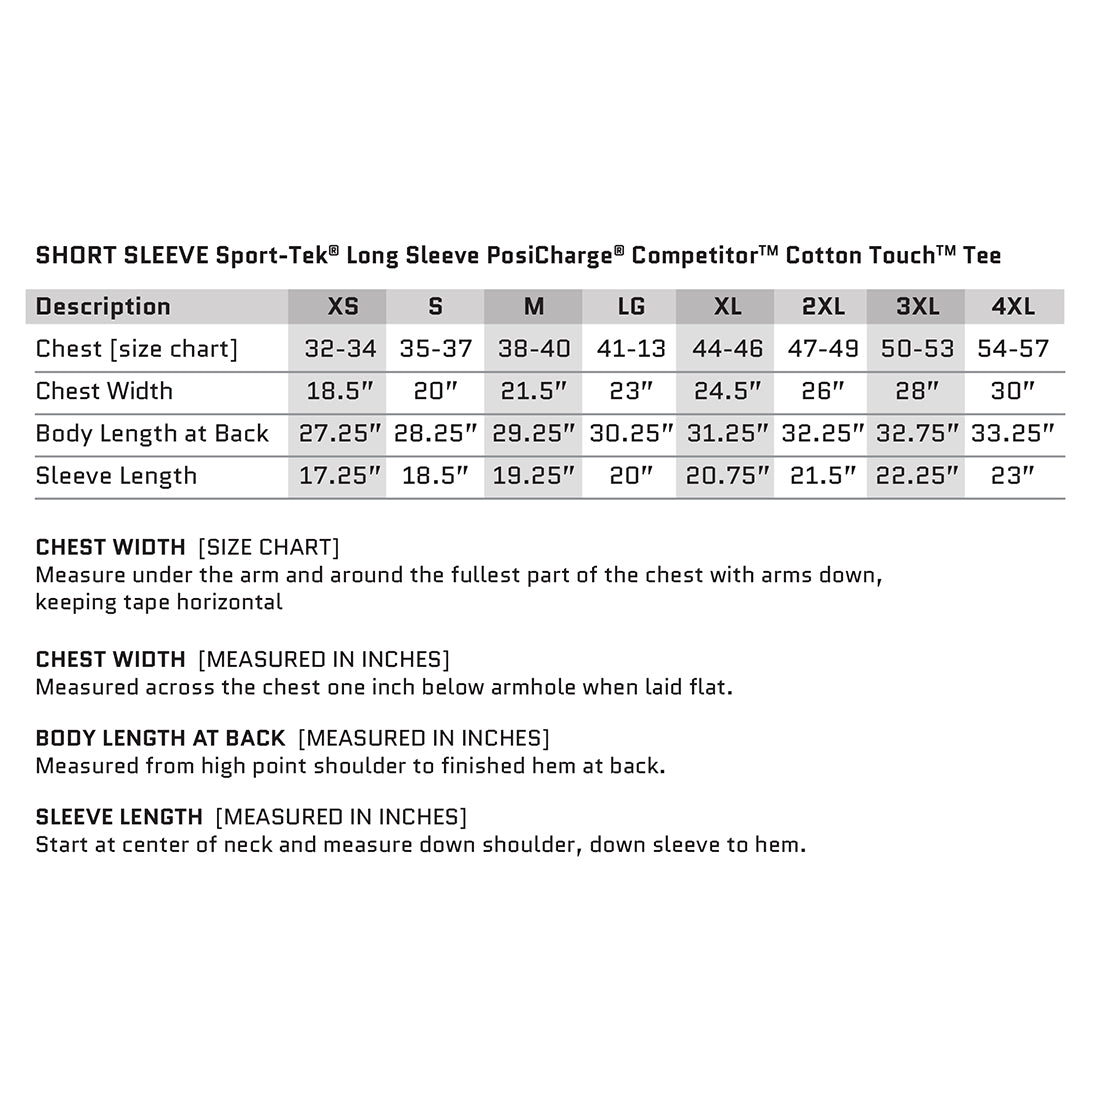 Sizing chart for men's light-weight Sport-Tek® Short Sleeve PosiCharge® Competitor™ Cotton Touch™ Tee shirt. Sizes XS through 4XL. Descriptions of Chest (size chart), Chest Width, Body Length at Back and Sleeve Length per size–per manufacturer's specs.